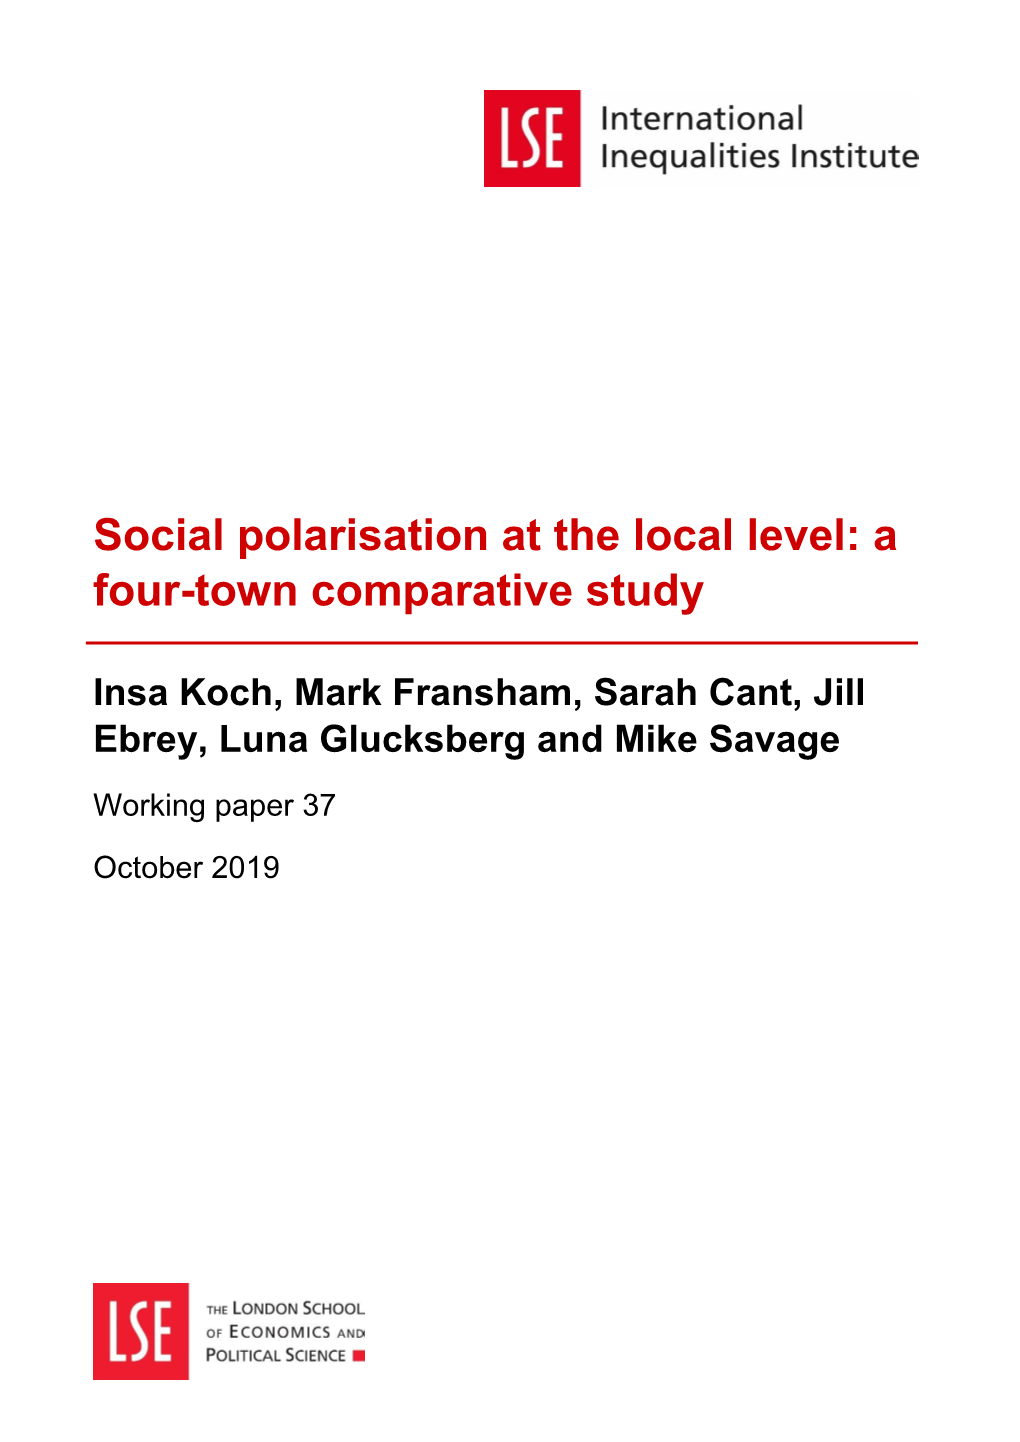 Social Polarisation at the Local Level: a Four-Town Comparative Study